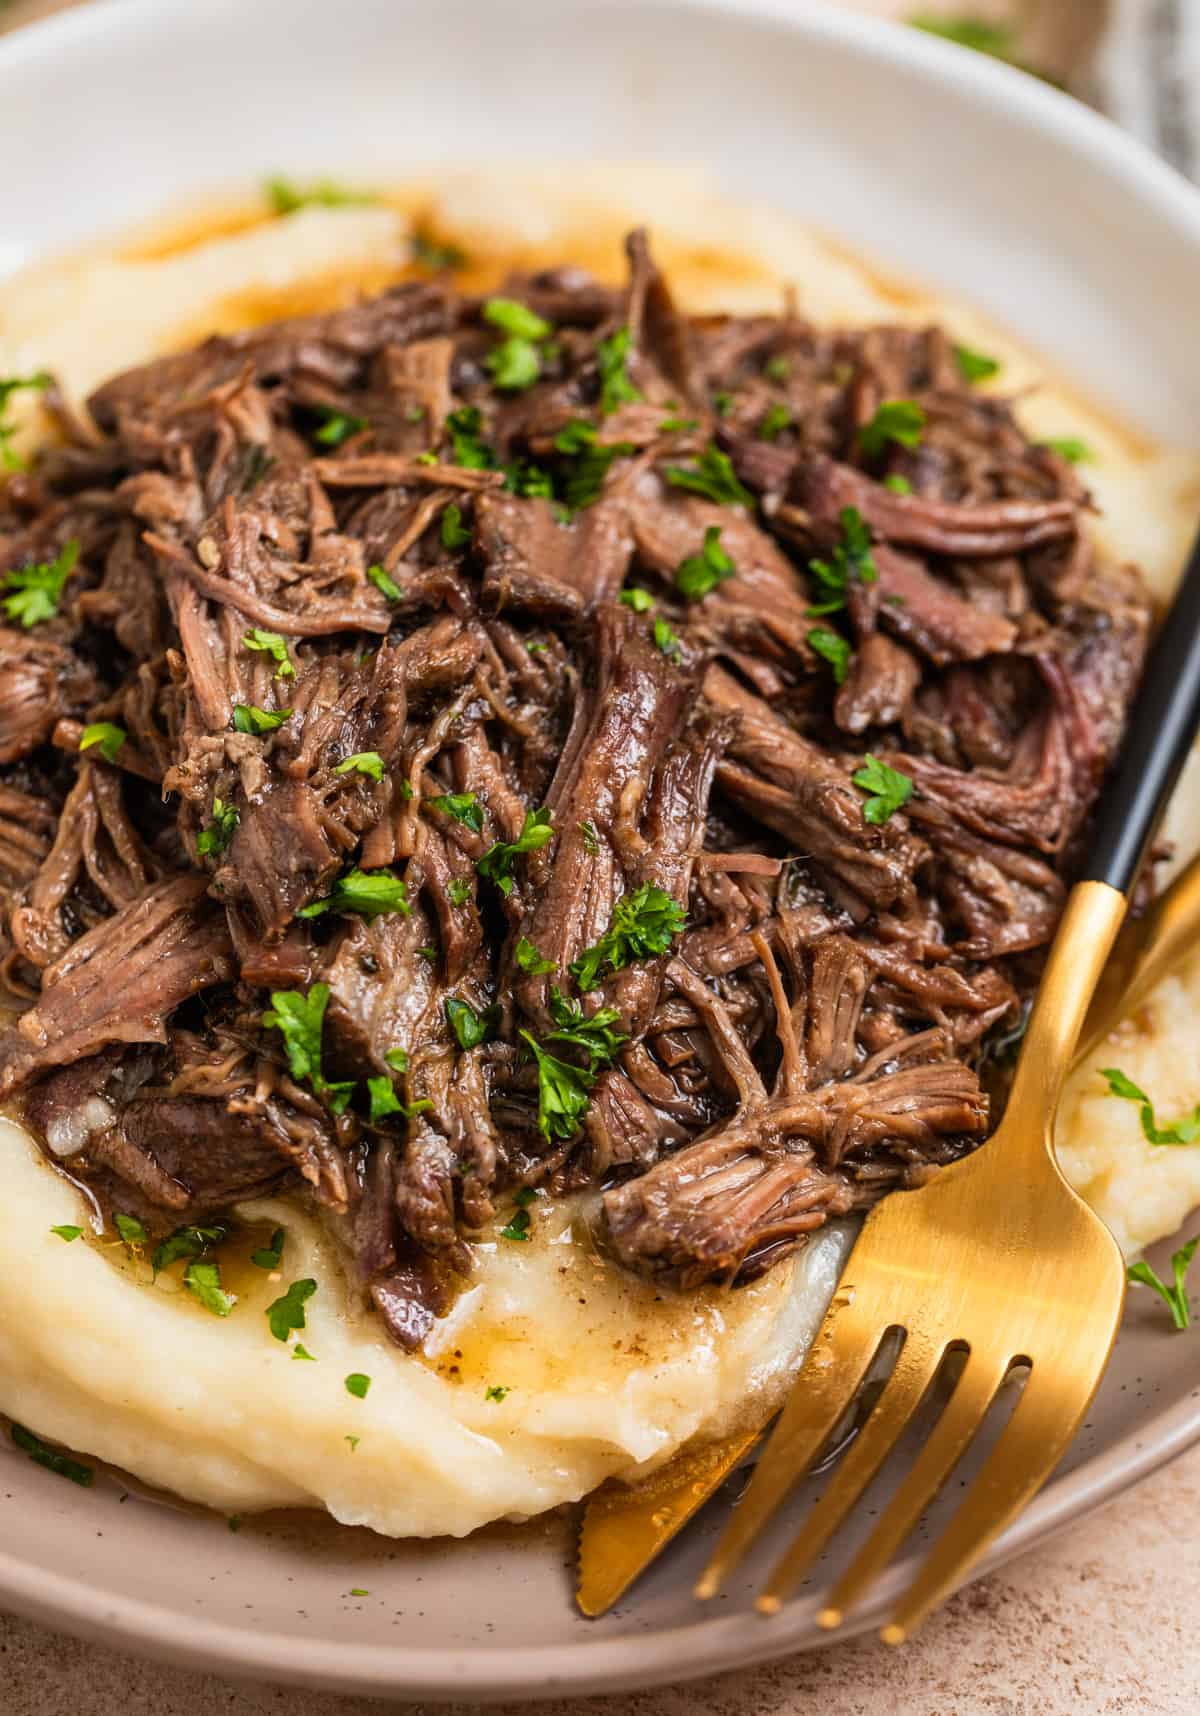 Dish with mashed potatoes topped with crock pot shredded beef.